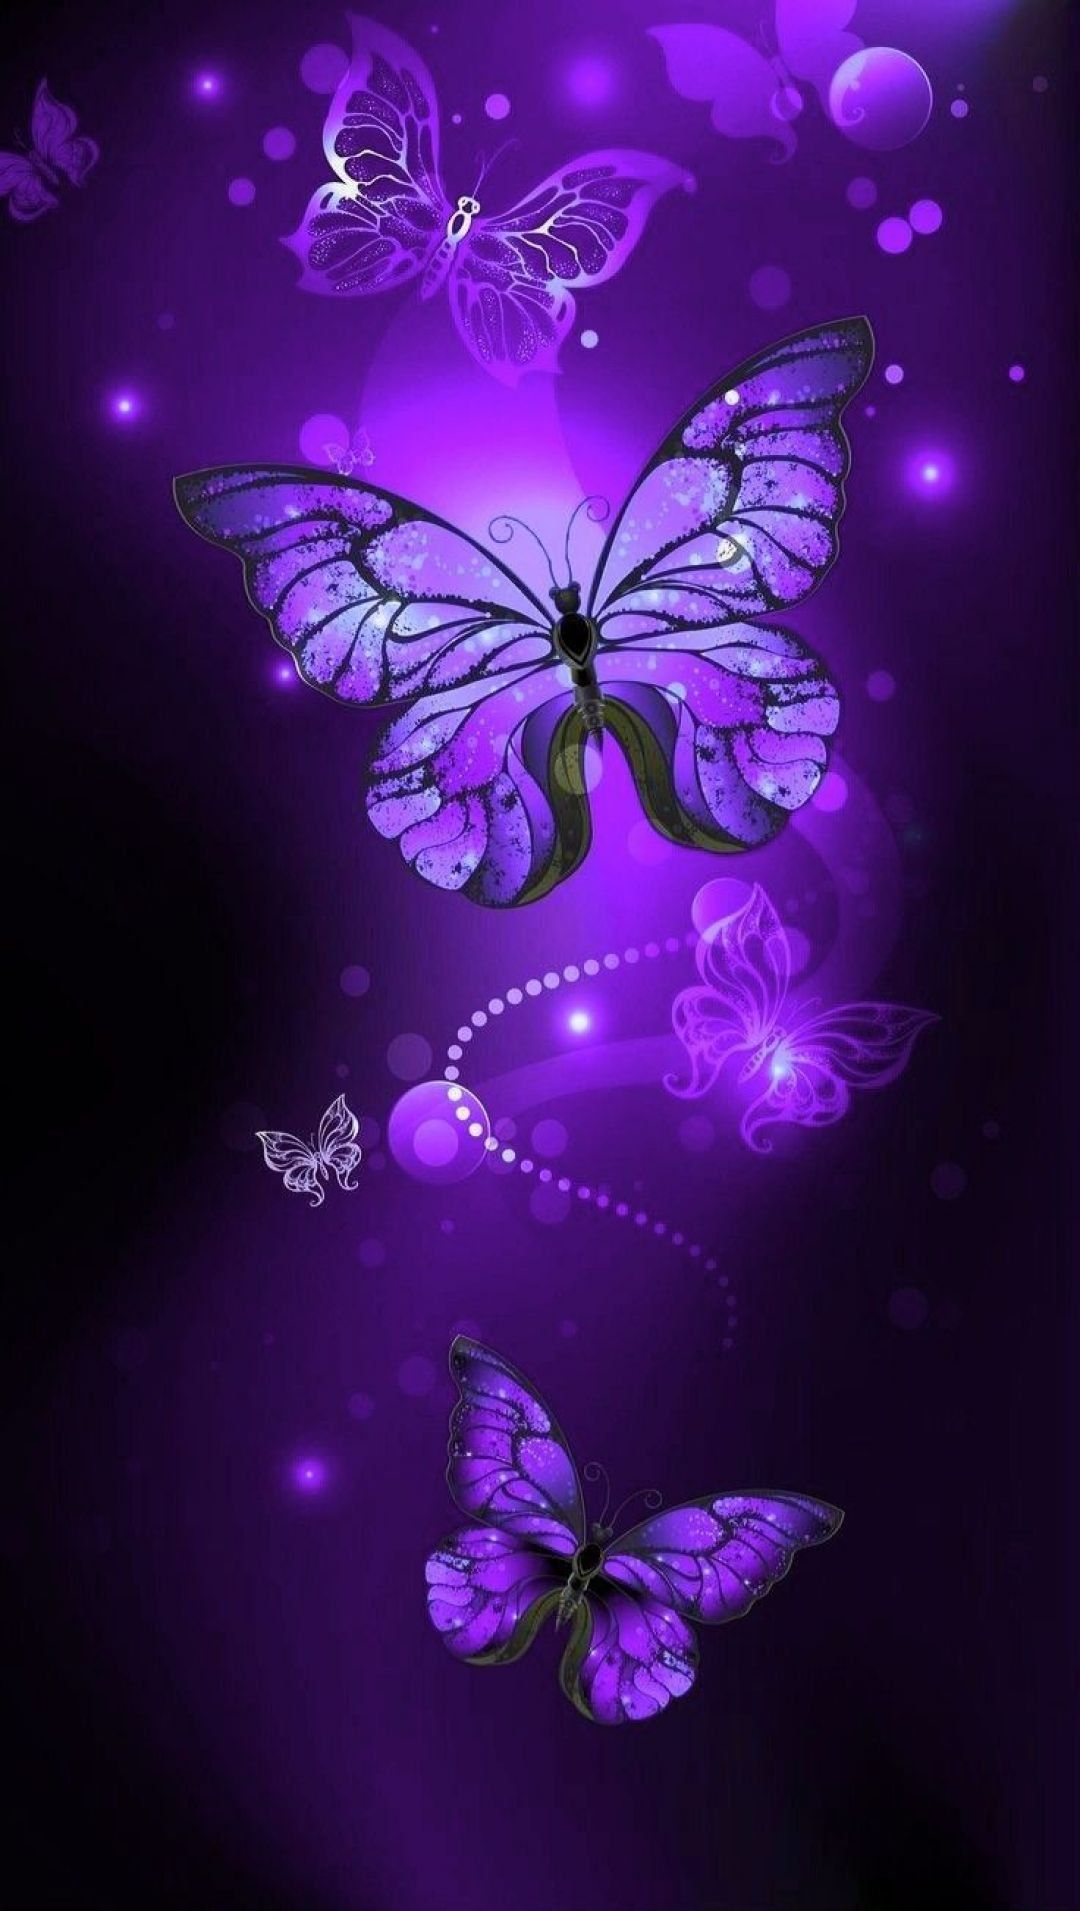 Iphone Butterfly Image Hd Wallpapers